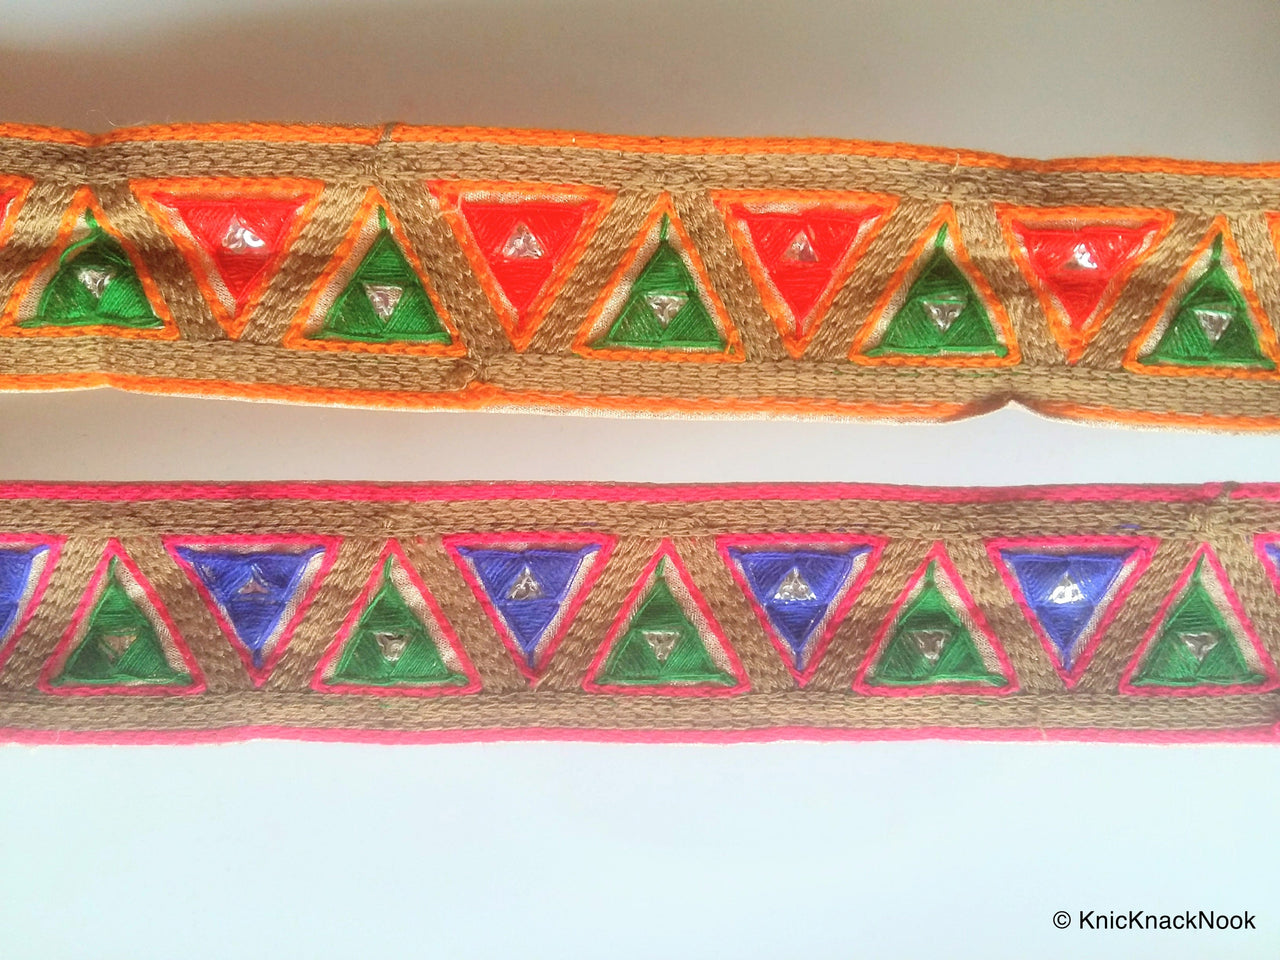 Wholesale Gold Fabric Trim With Green and Orange Triangle Embroidery, Embroidered Trim, 9 Yards